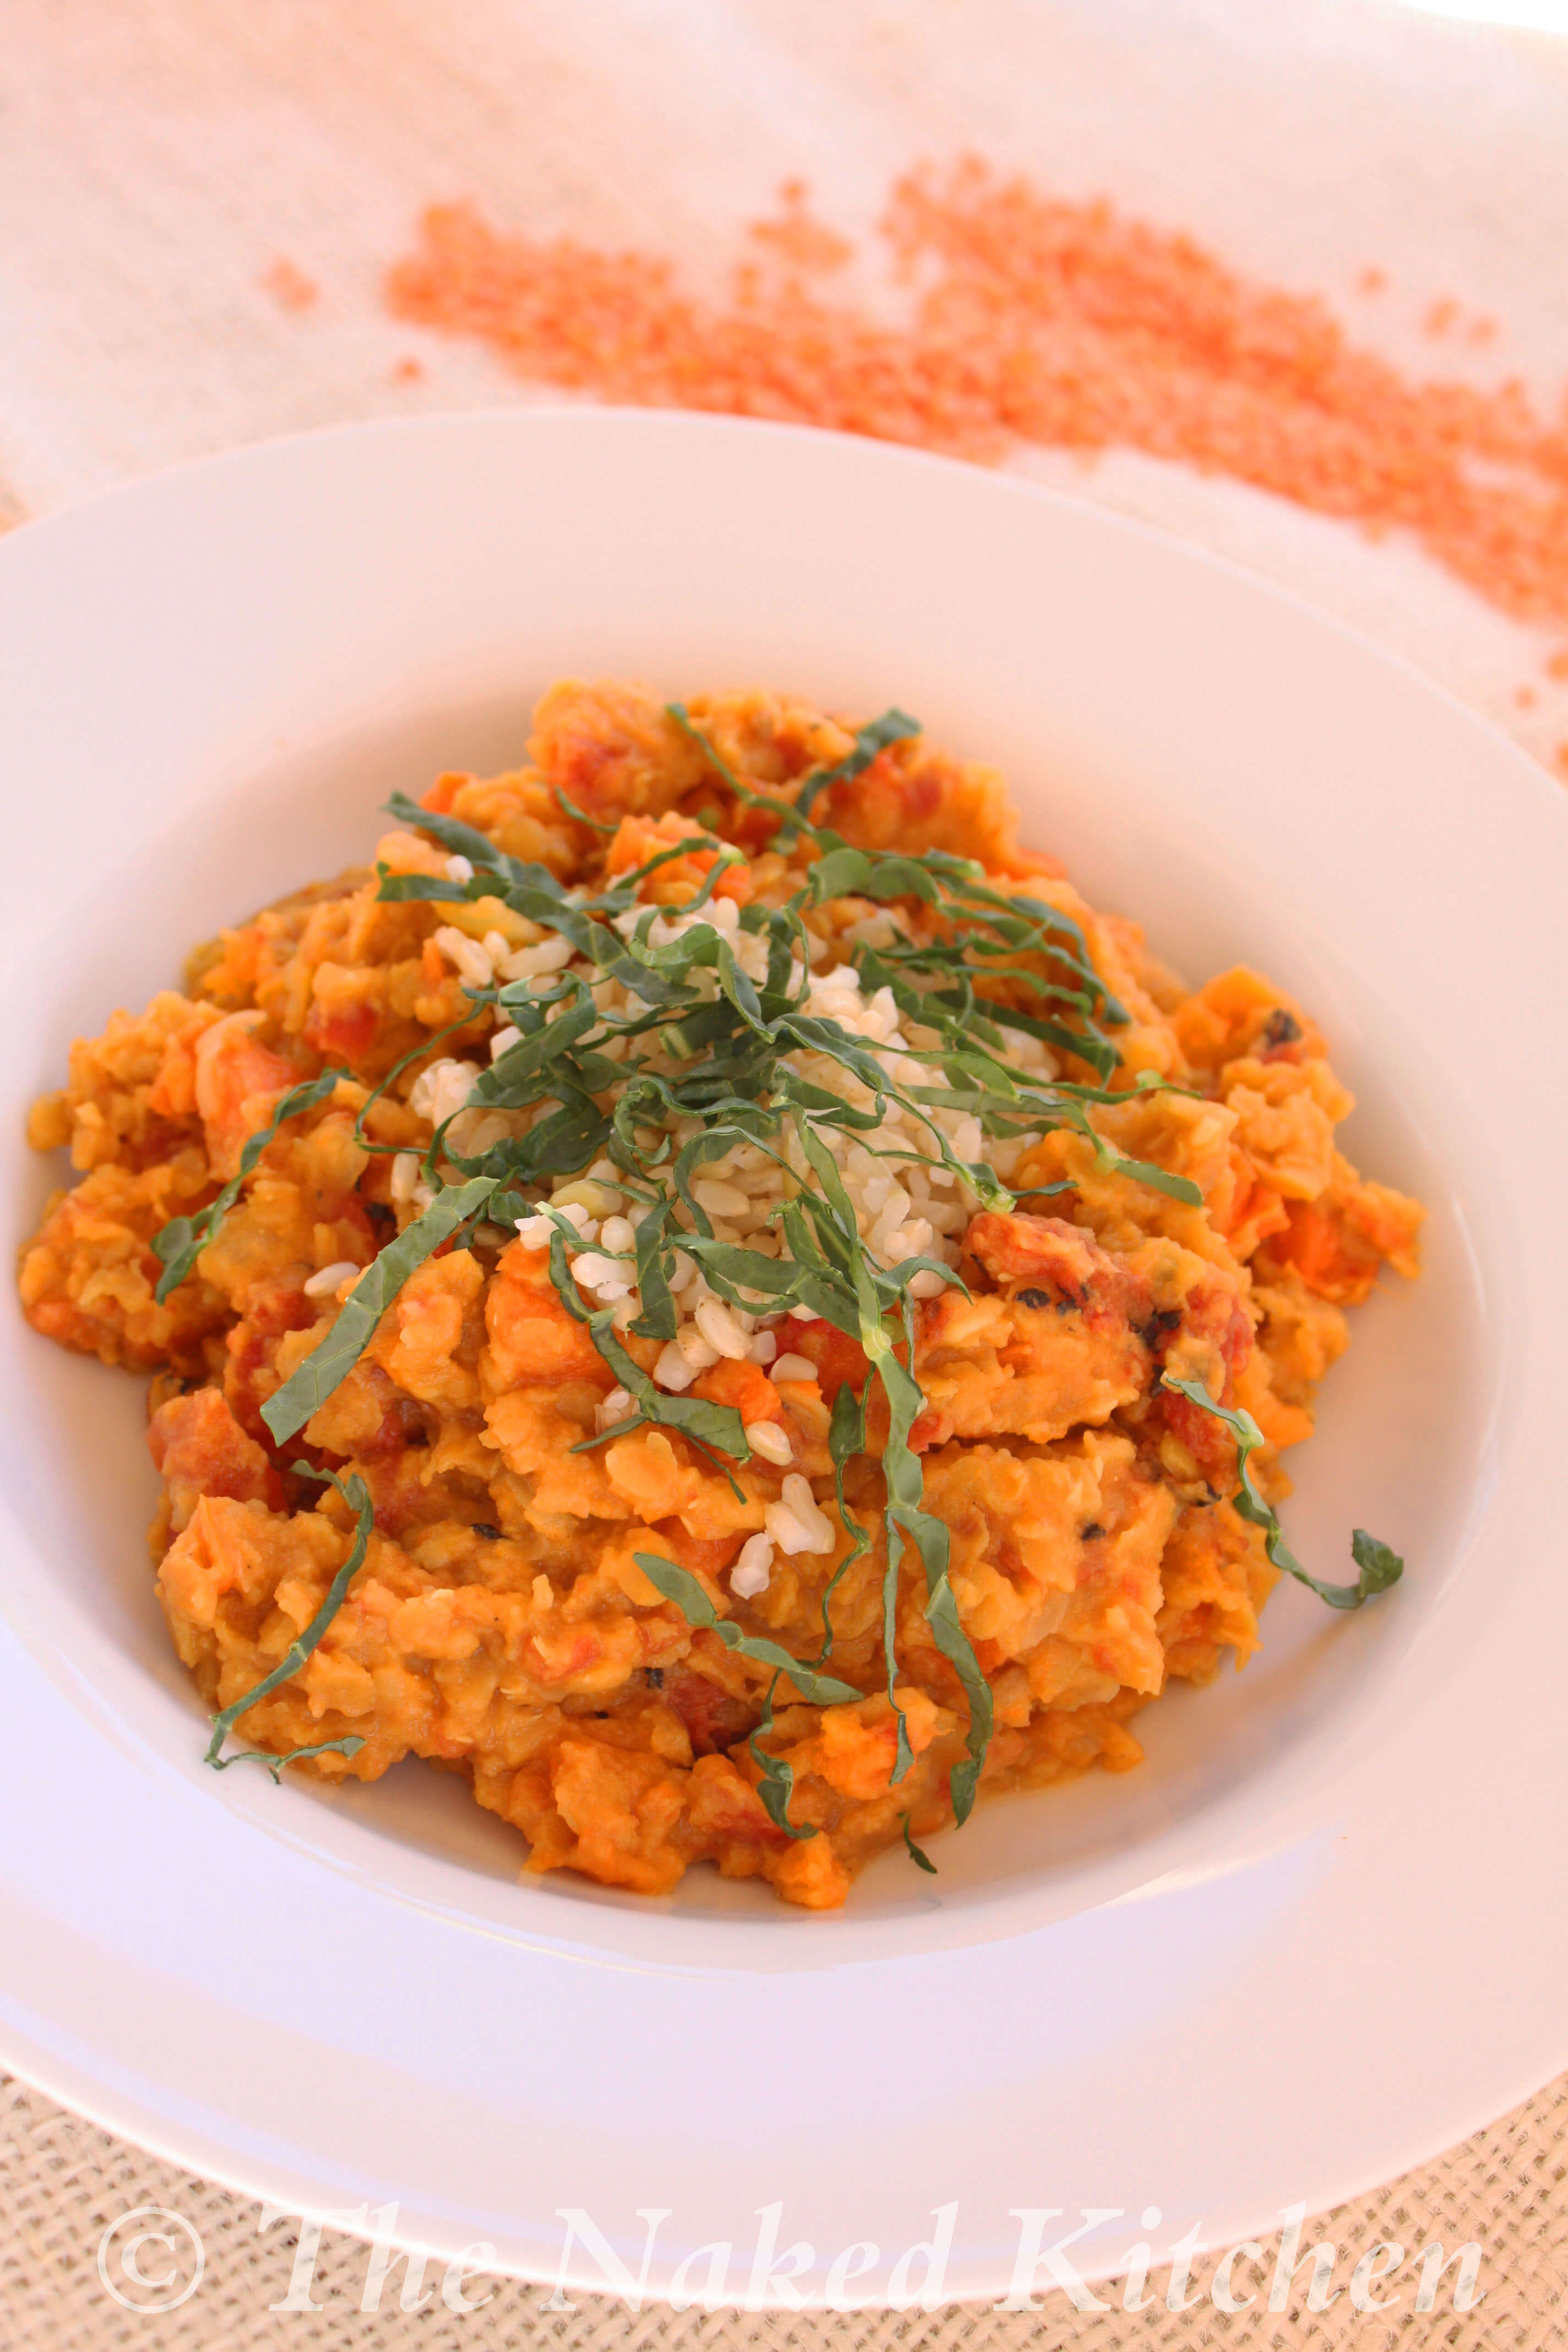 Red Lentil Coconut Curry